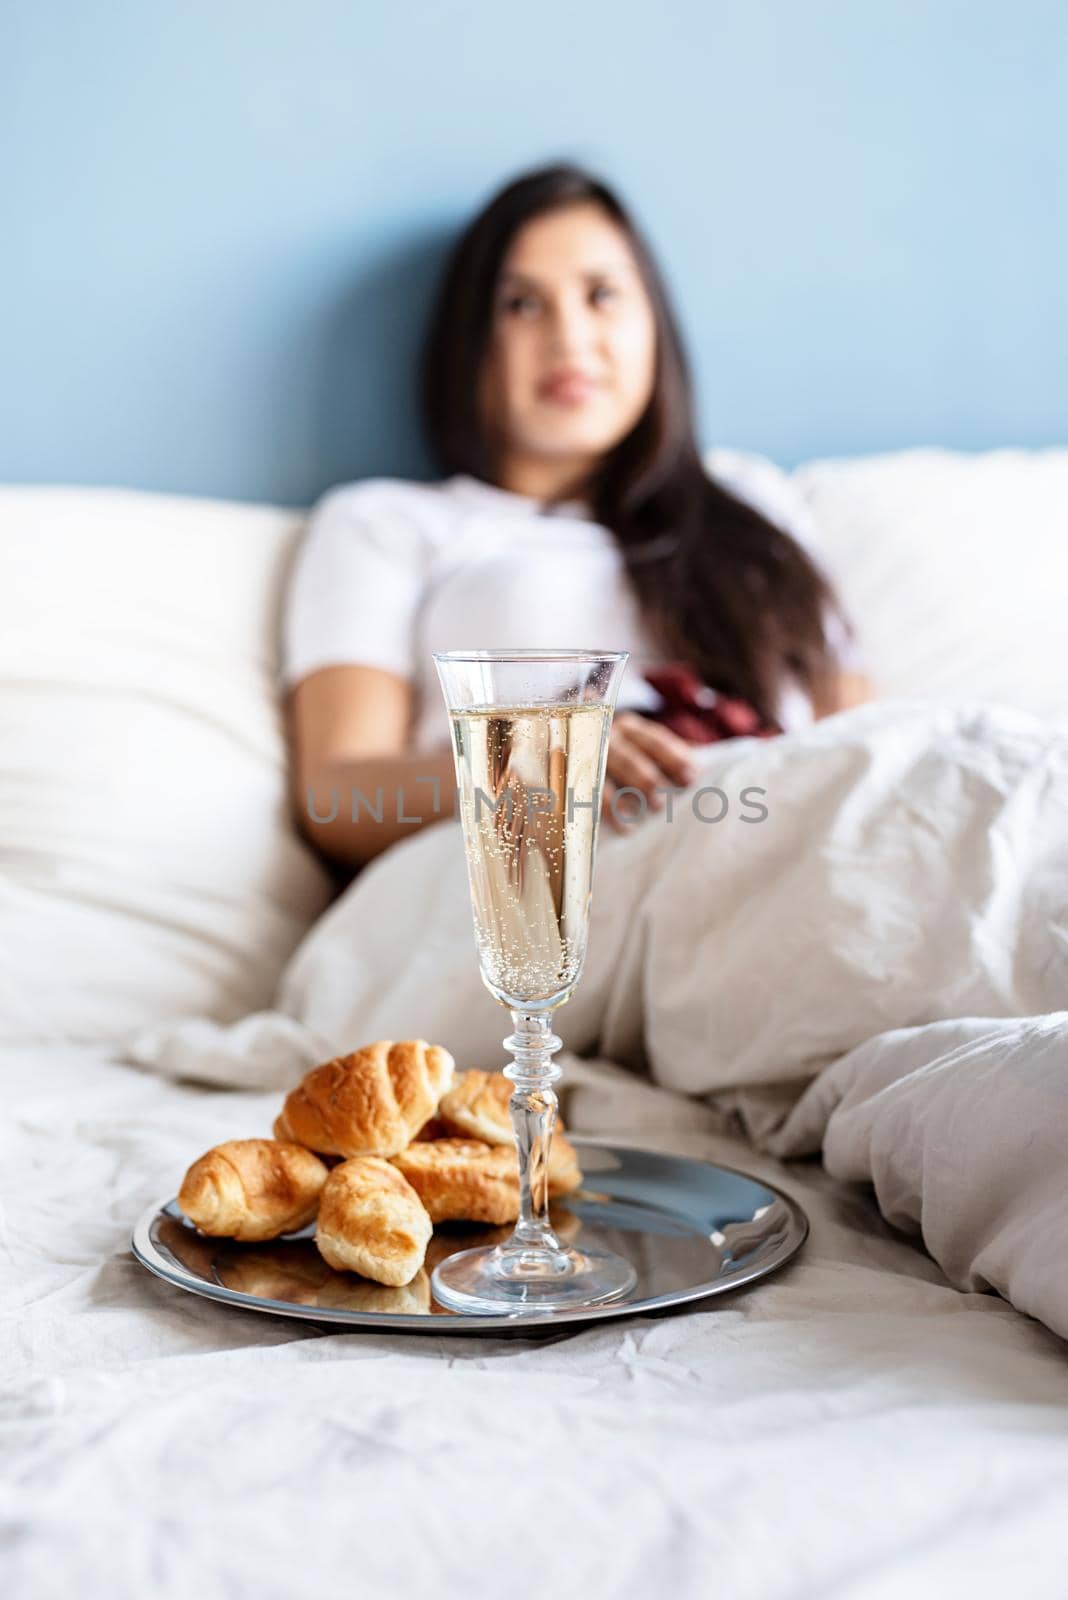 Valentines Day. Young brunette woman sitting awake in the bed with red heart shaped balloons and decorations drinking champagne eating croissants